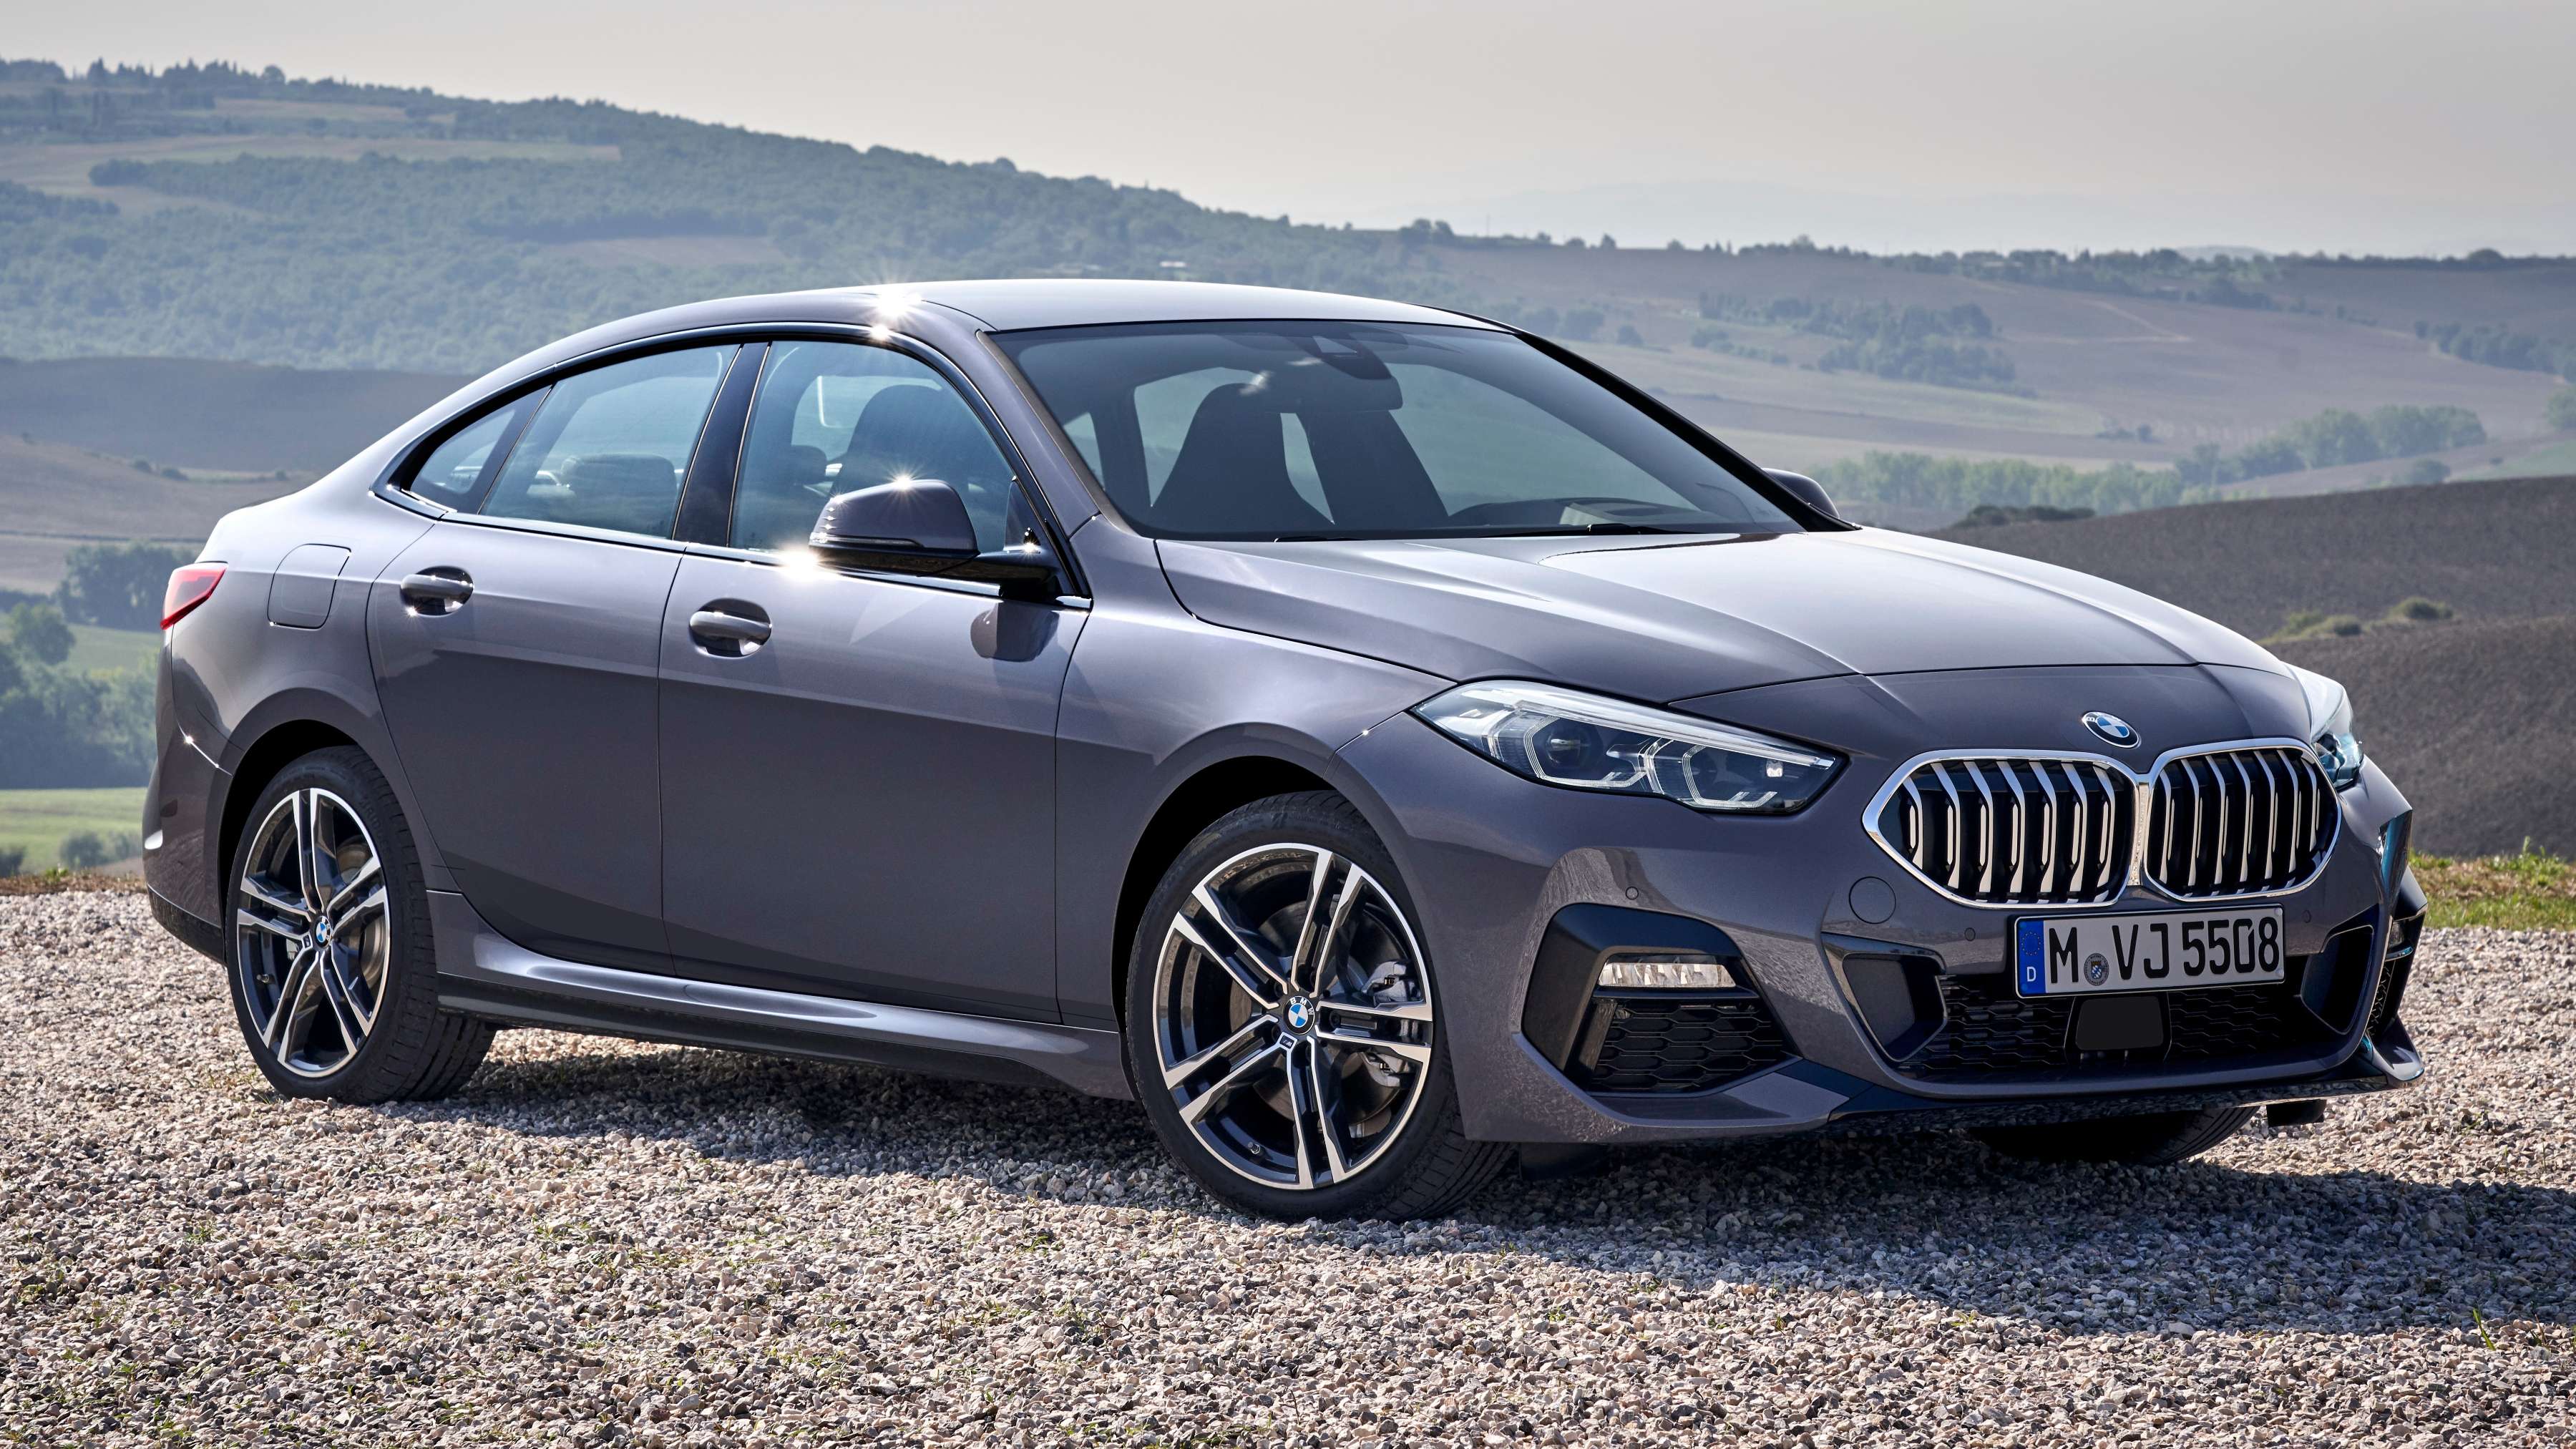 Bmw 2 Series Gran Coupe Bmw Set To Invade New Segment With 2 Series Gran Coupe Price Expectation Times Of India